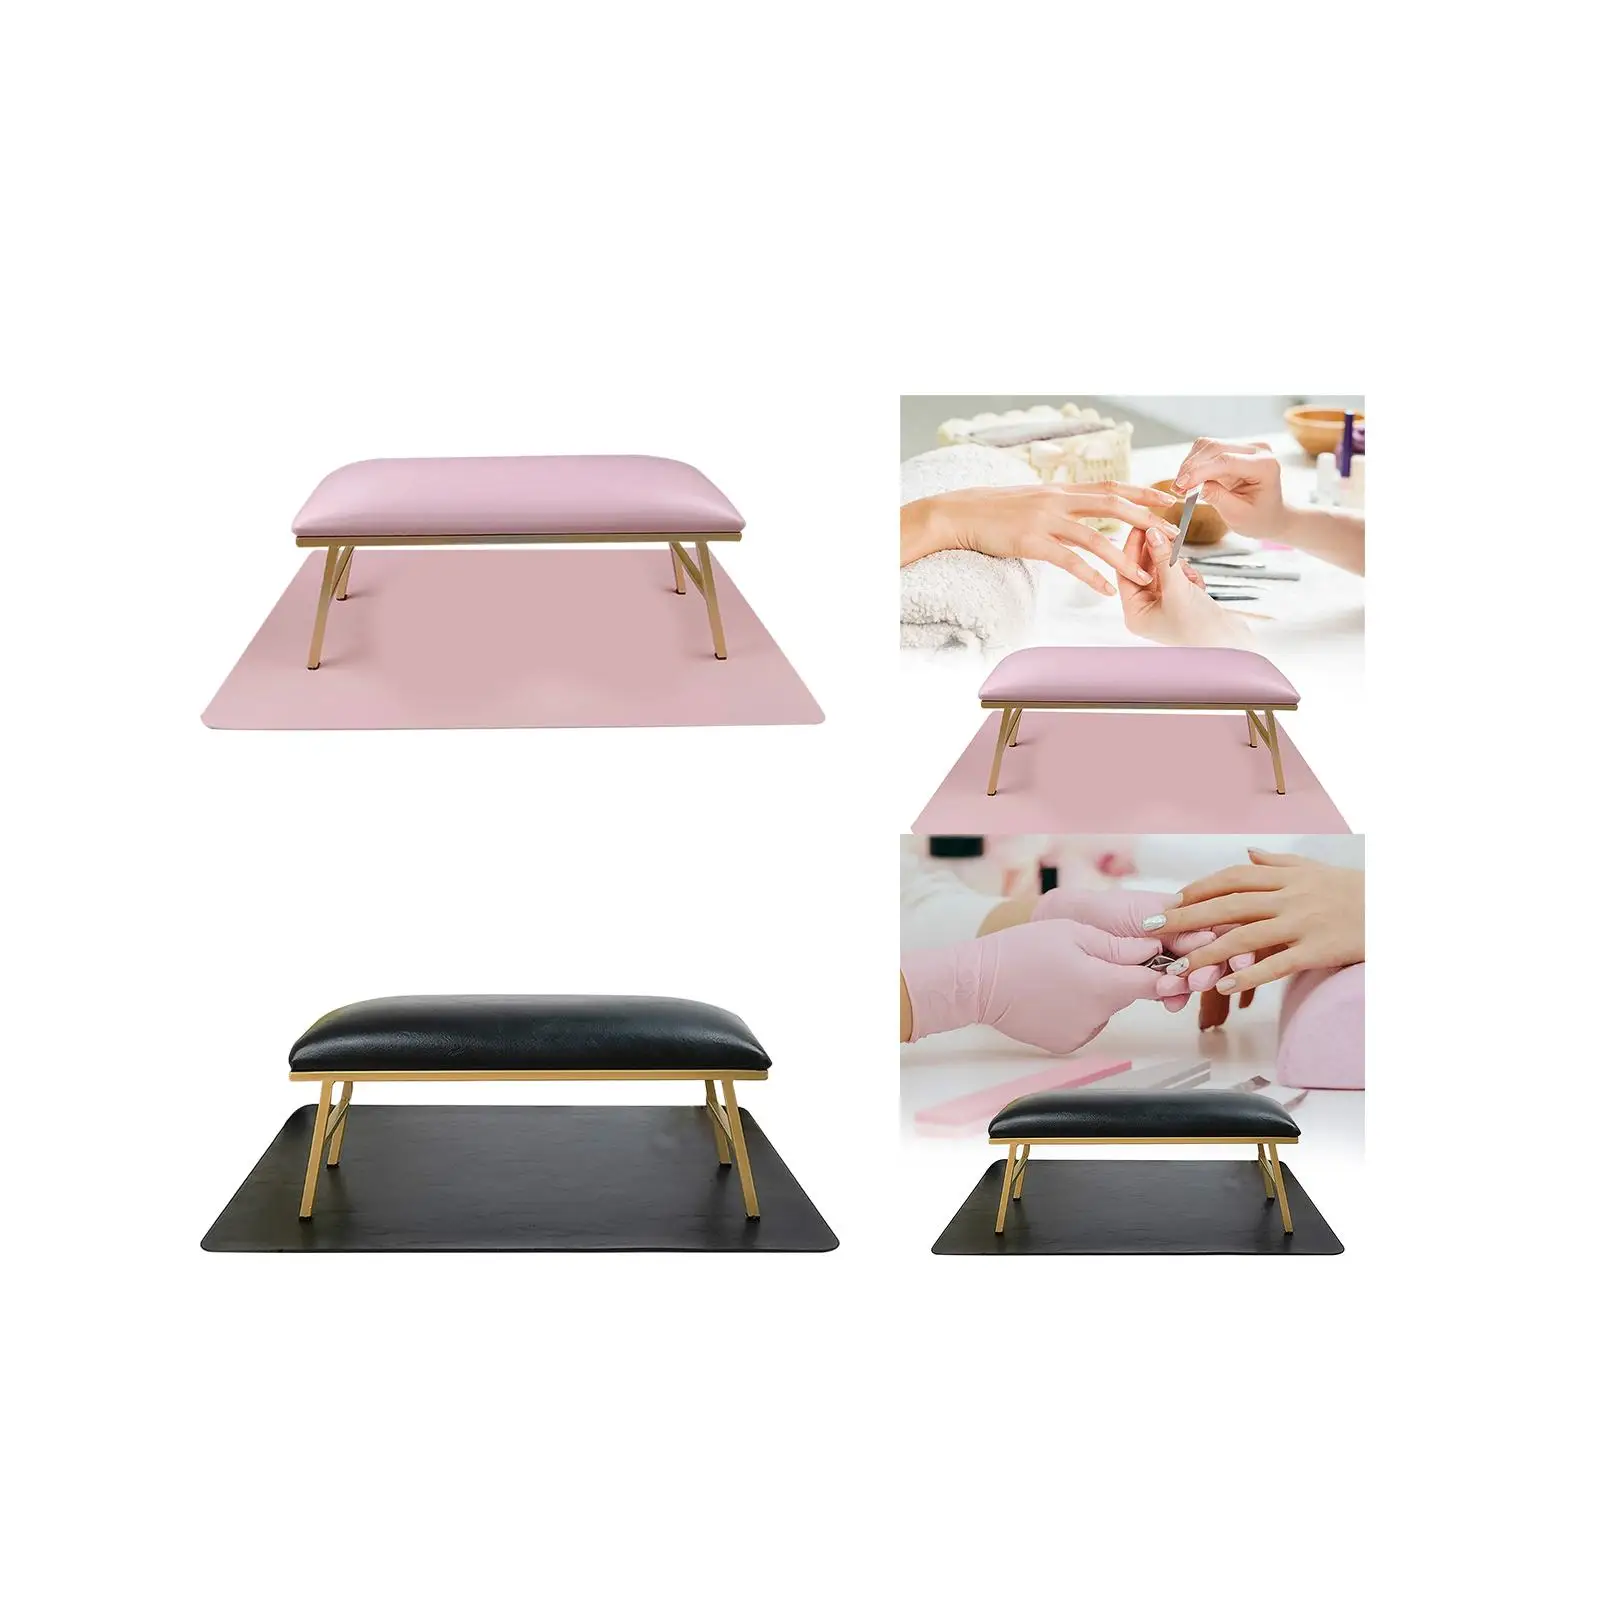 Nail Pillow and Mat Professional Comfortable PU Leather Soft Nail Arm Rest Holder for Salon Home Manicurist Nail Techs Use Hand